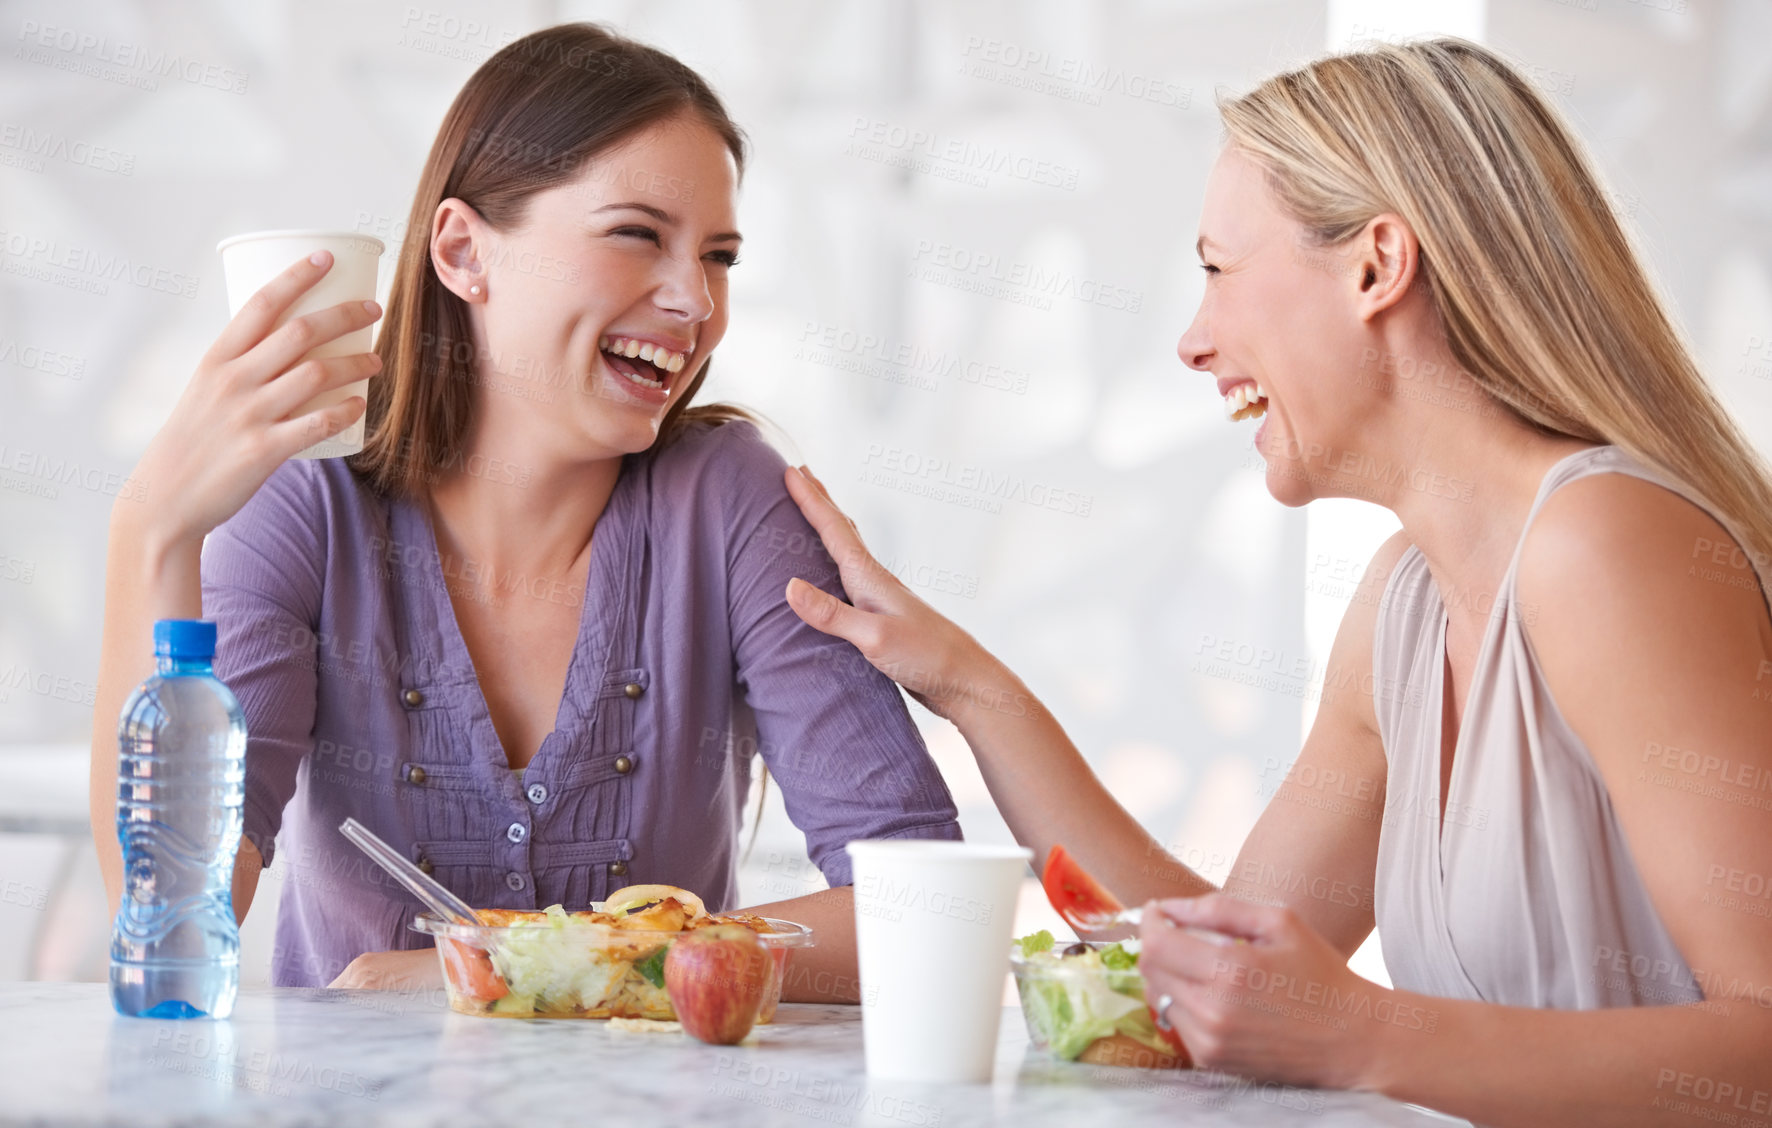 Buy stock photo Laughing, colleagues or friends at lunch in cafeteria with funny conversation, smile and eating. Healthy food, drinks and happy women in cafe for gossip, bonding and employees in break room together.